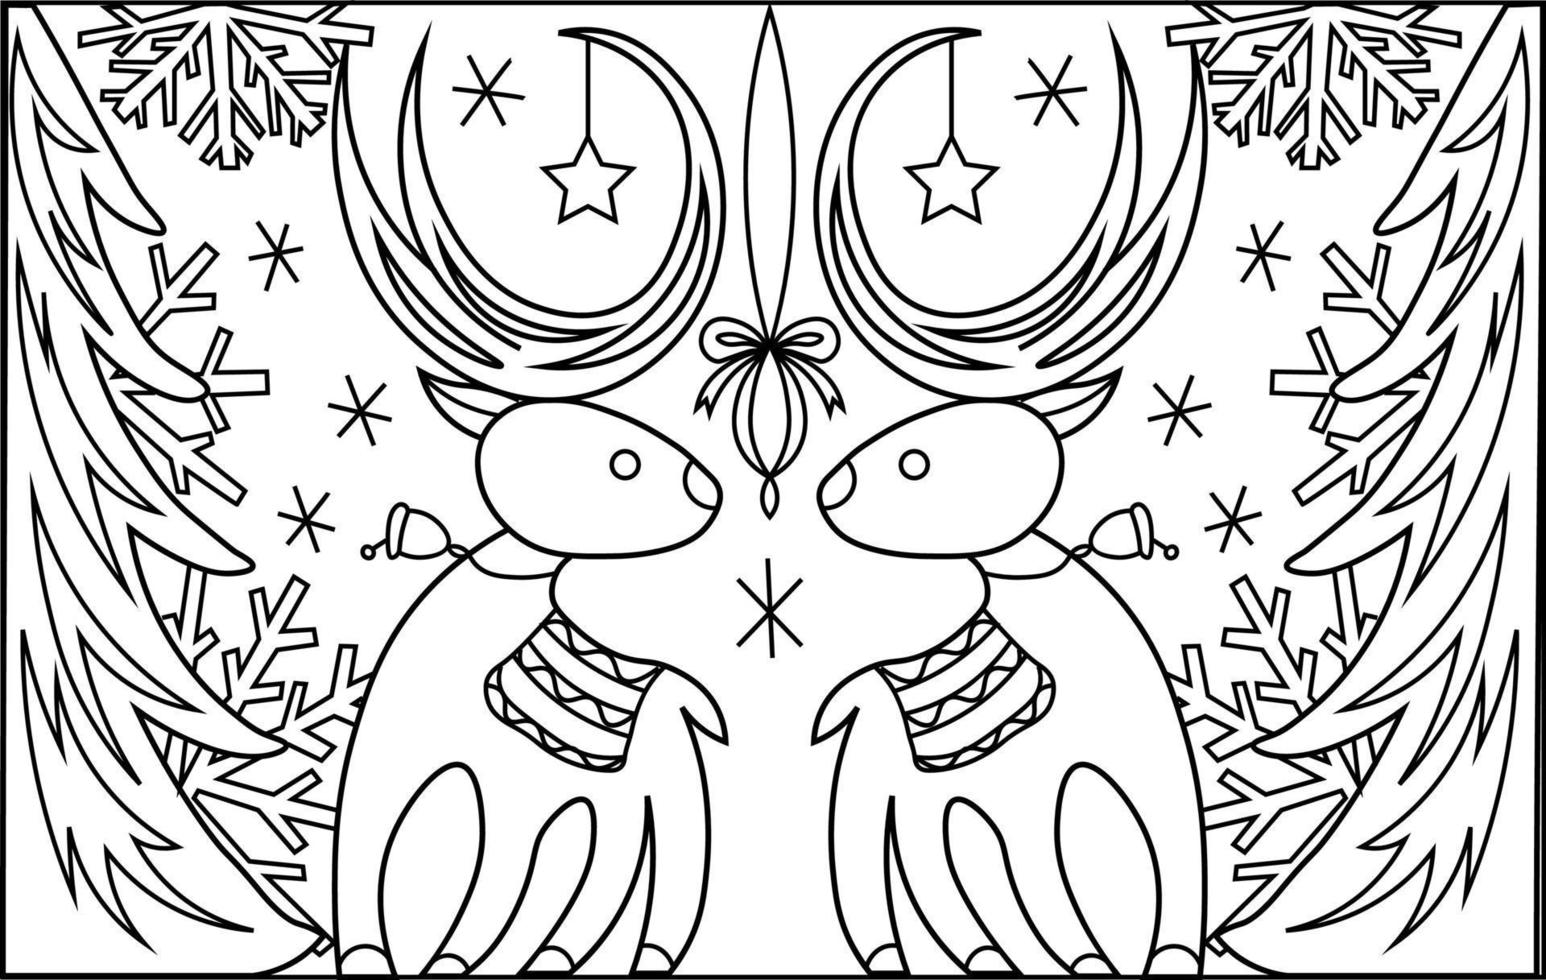 Christmas coloring book. Coloring page with reindeer. Snowflakes and Christmas trees. vector